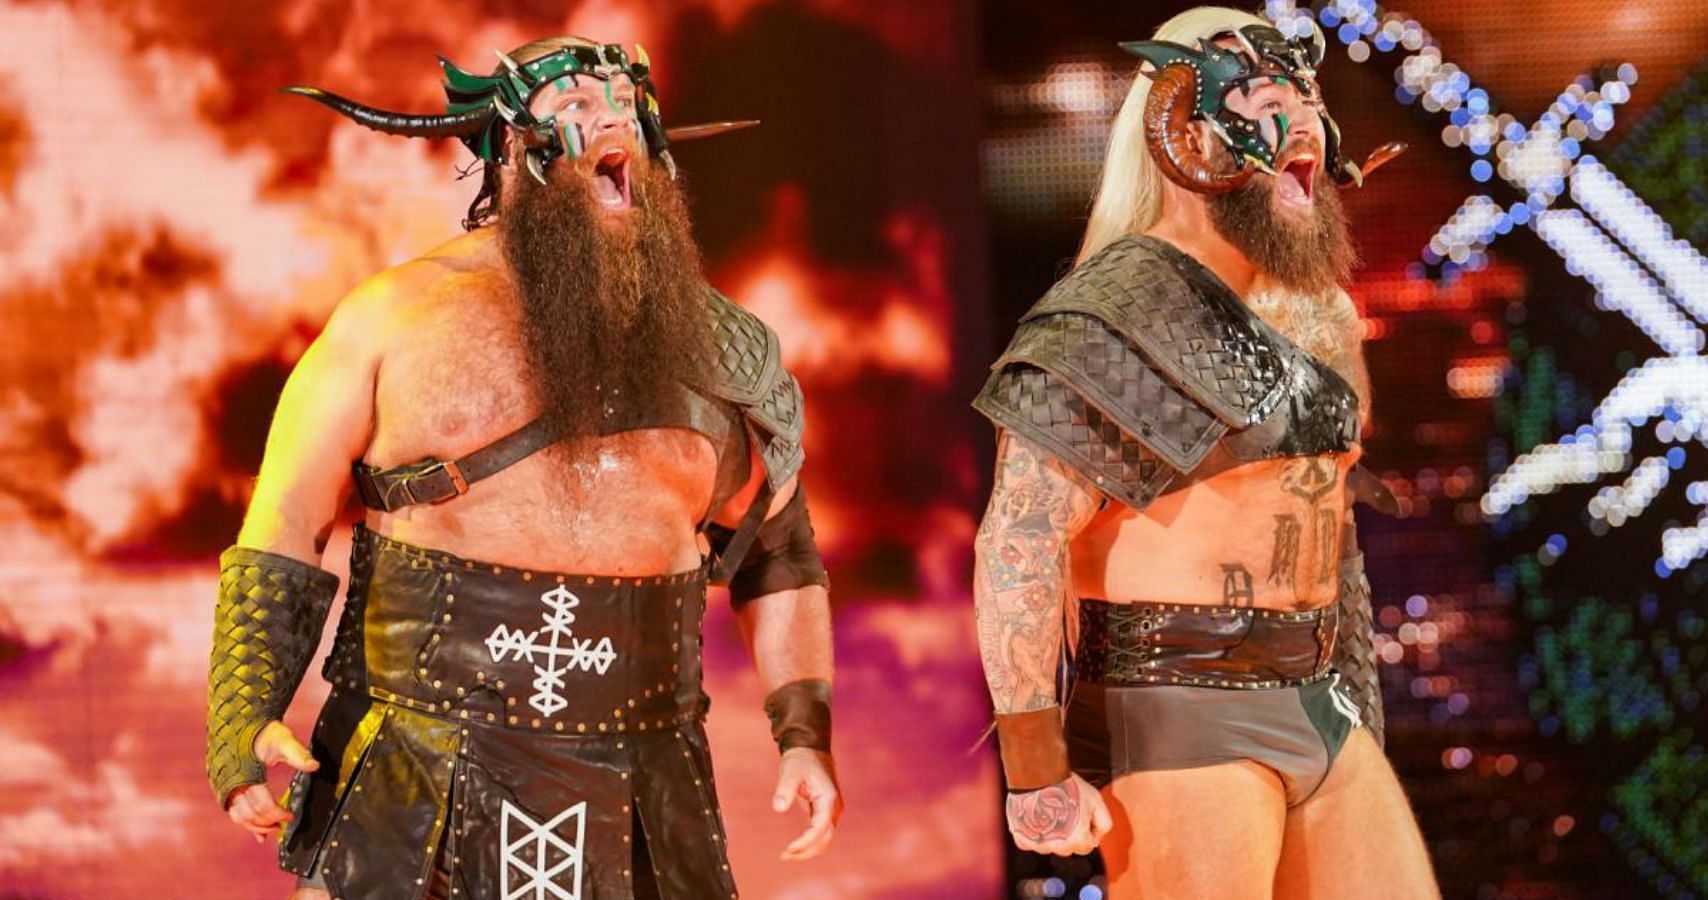 Erik and Ivar are former RAW Tag Team Champions.